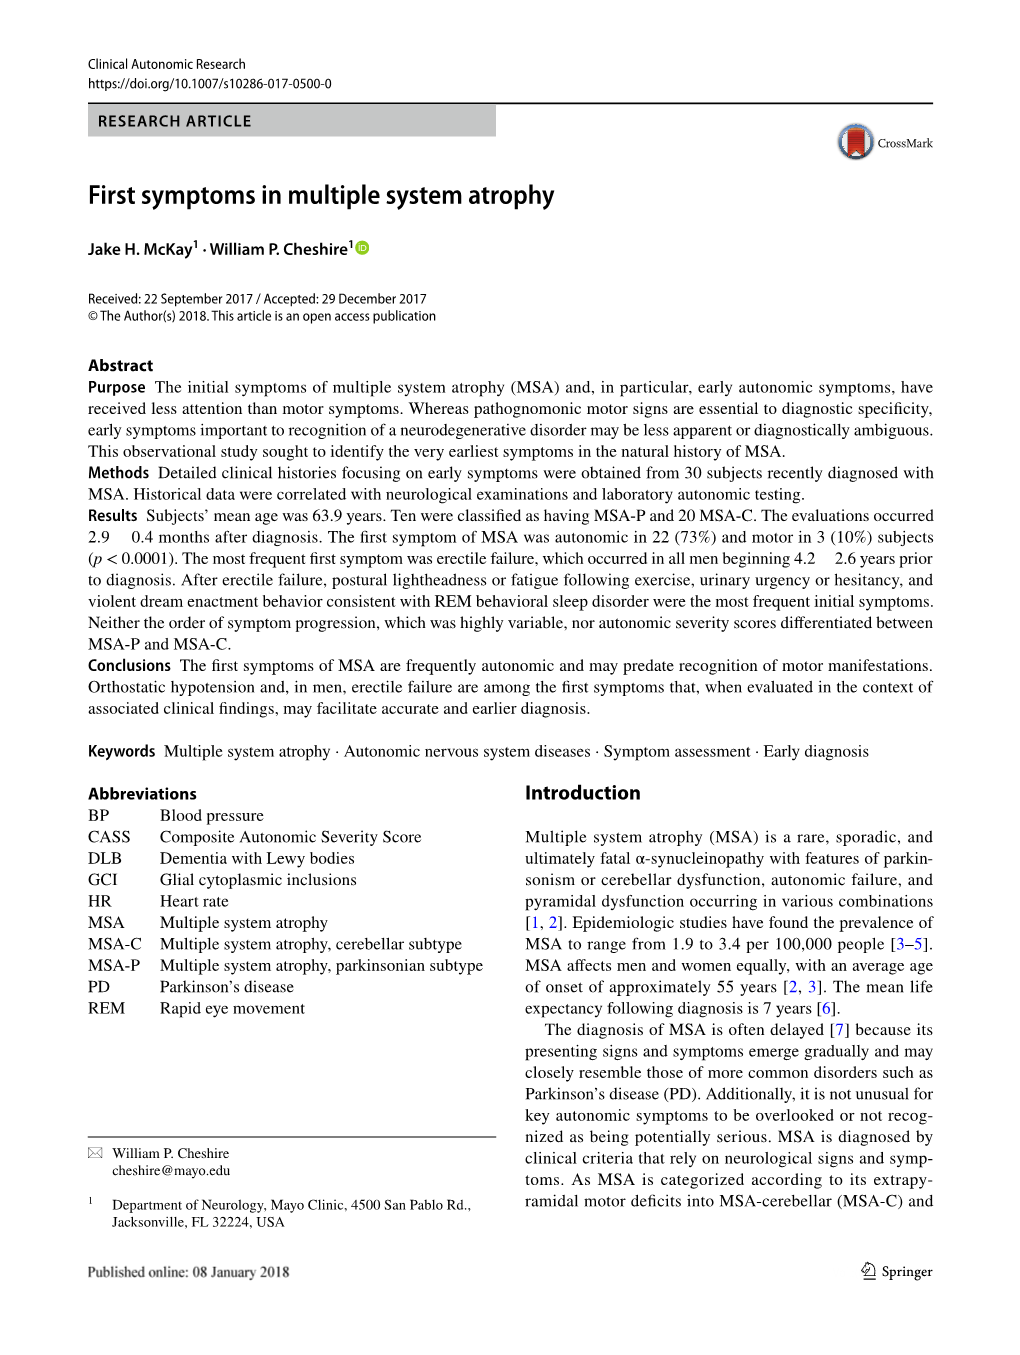 First Symptoms in Multiple System Atrophy